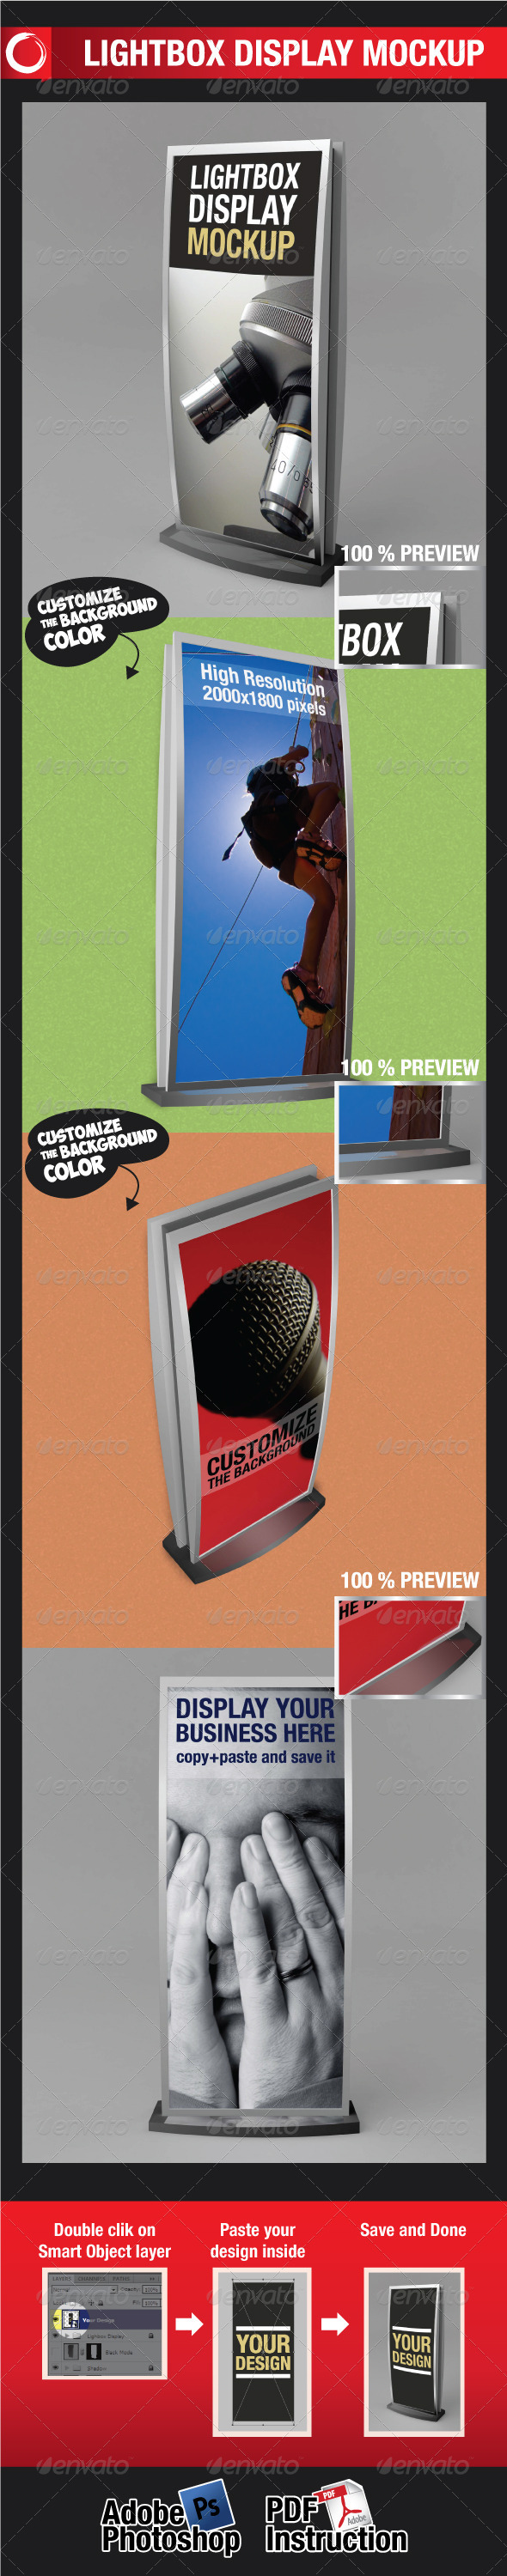 Download Lightbox Display Mockup by obo | GraphicRiver